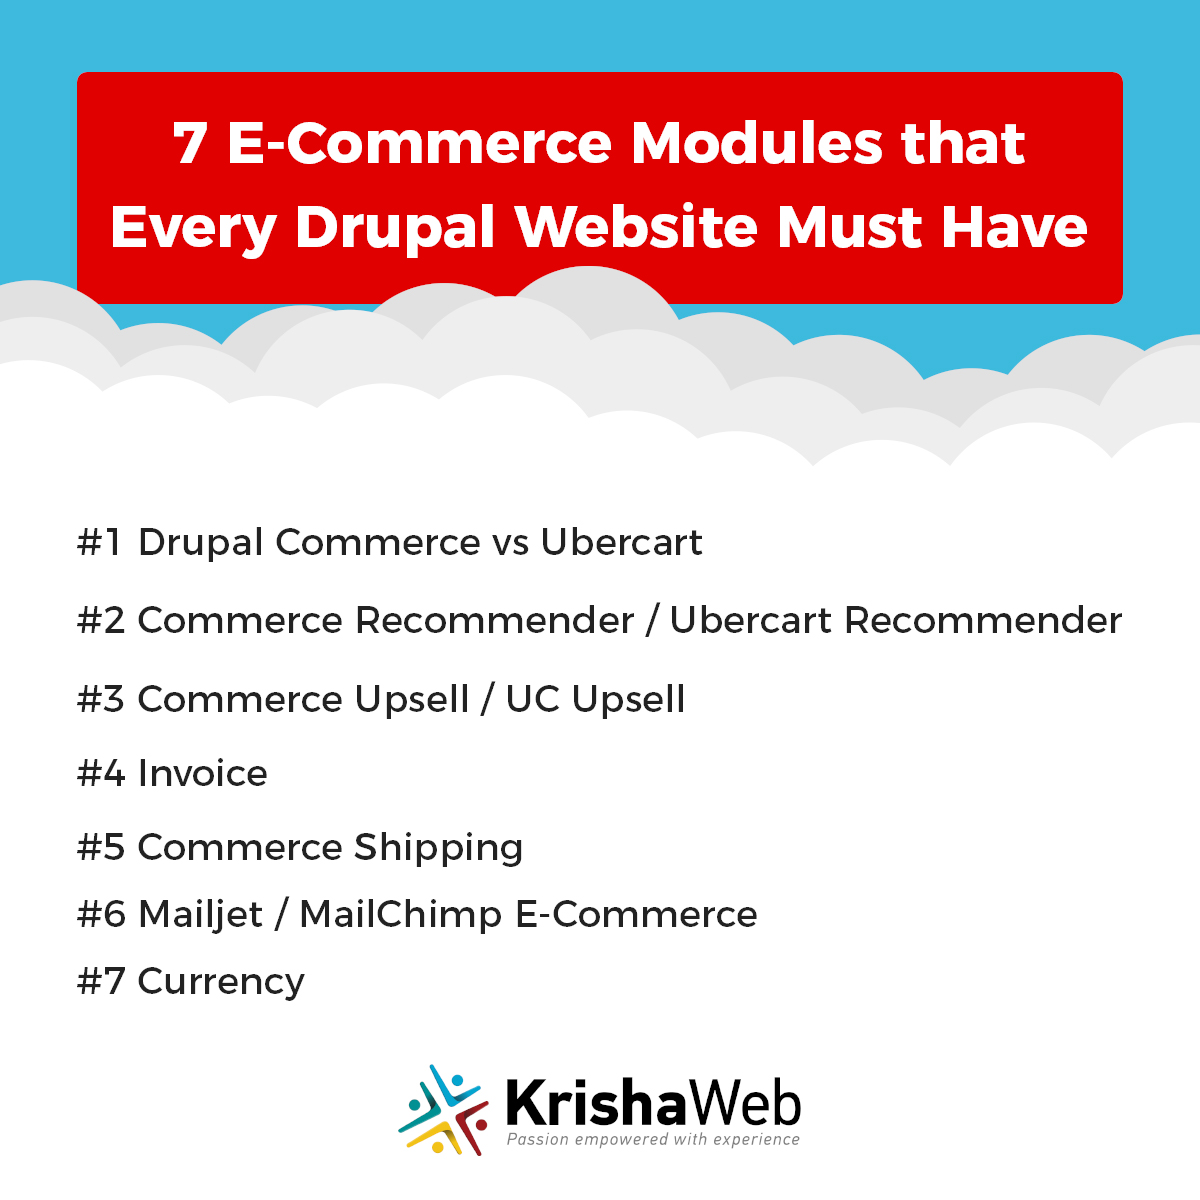 7 E-Commerce Modules that Every Drupal Website Must Have